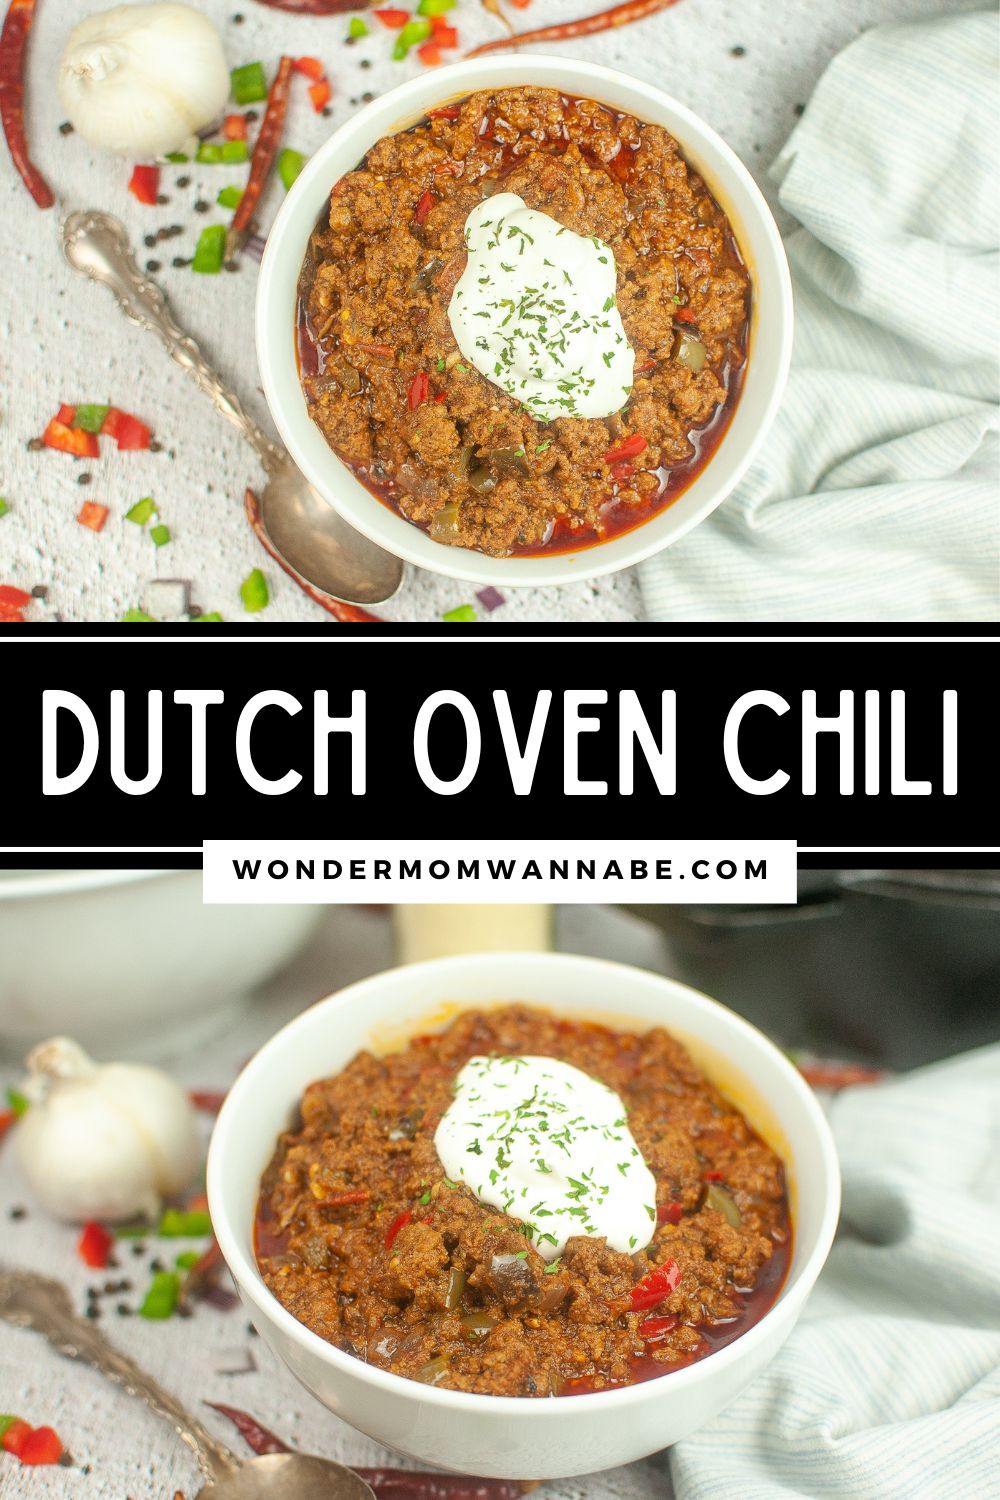 Dutch oven chili topped with sour cream in a bowl.